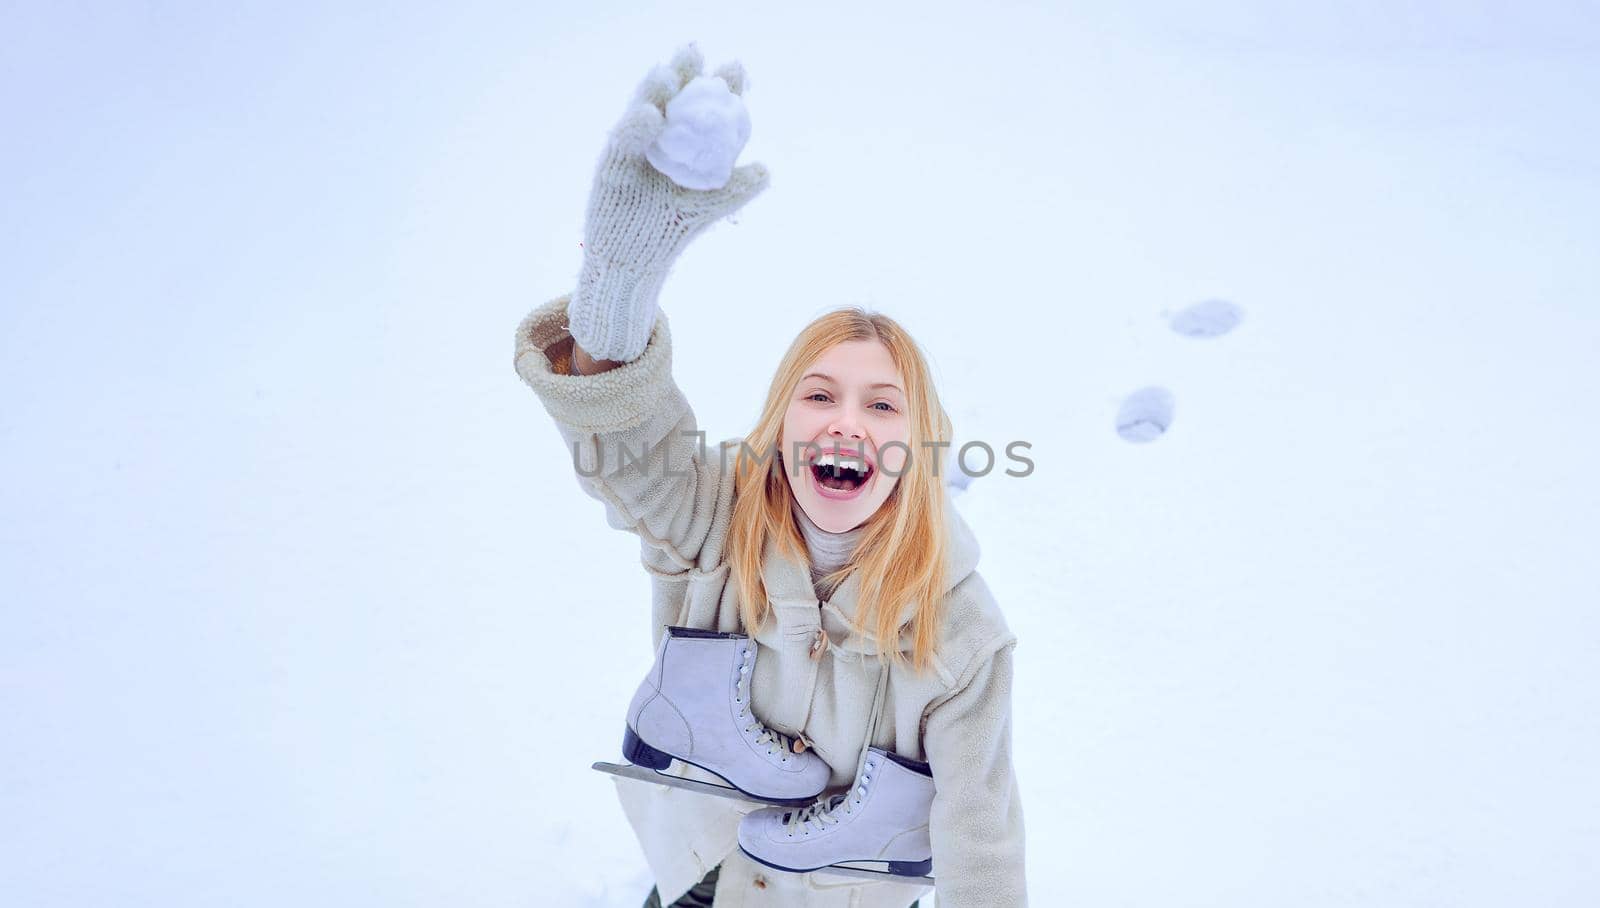 Funny smiling young woman in wintertime outdoor. Happy winter fun woman. Winter game. Beautiful smiling young woman in warm clothing with ice skates. by Tverdokhlib